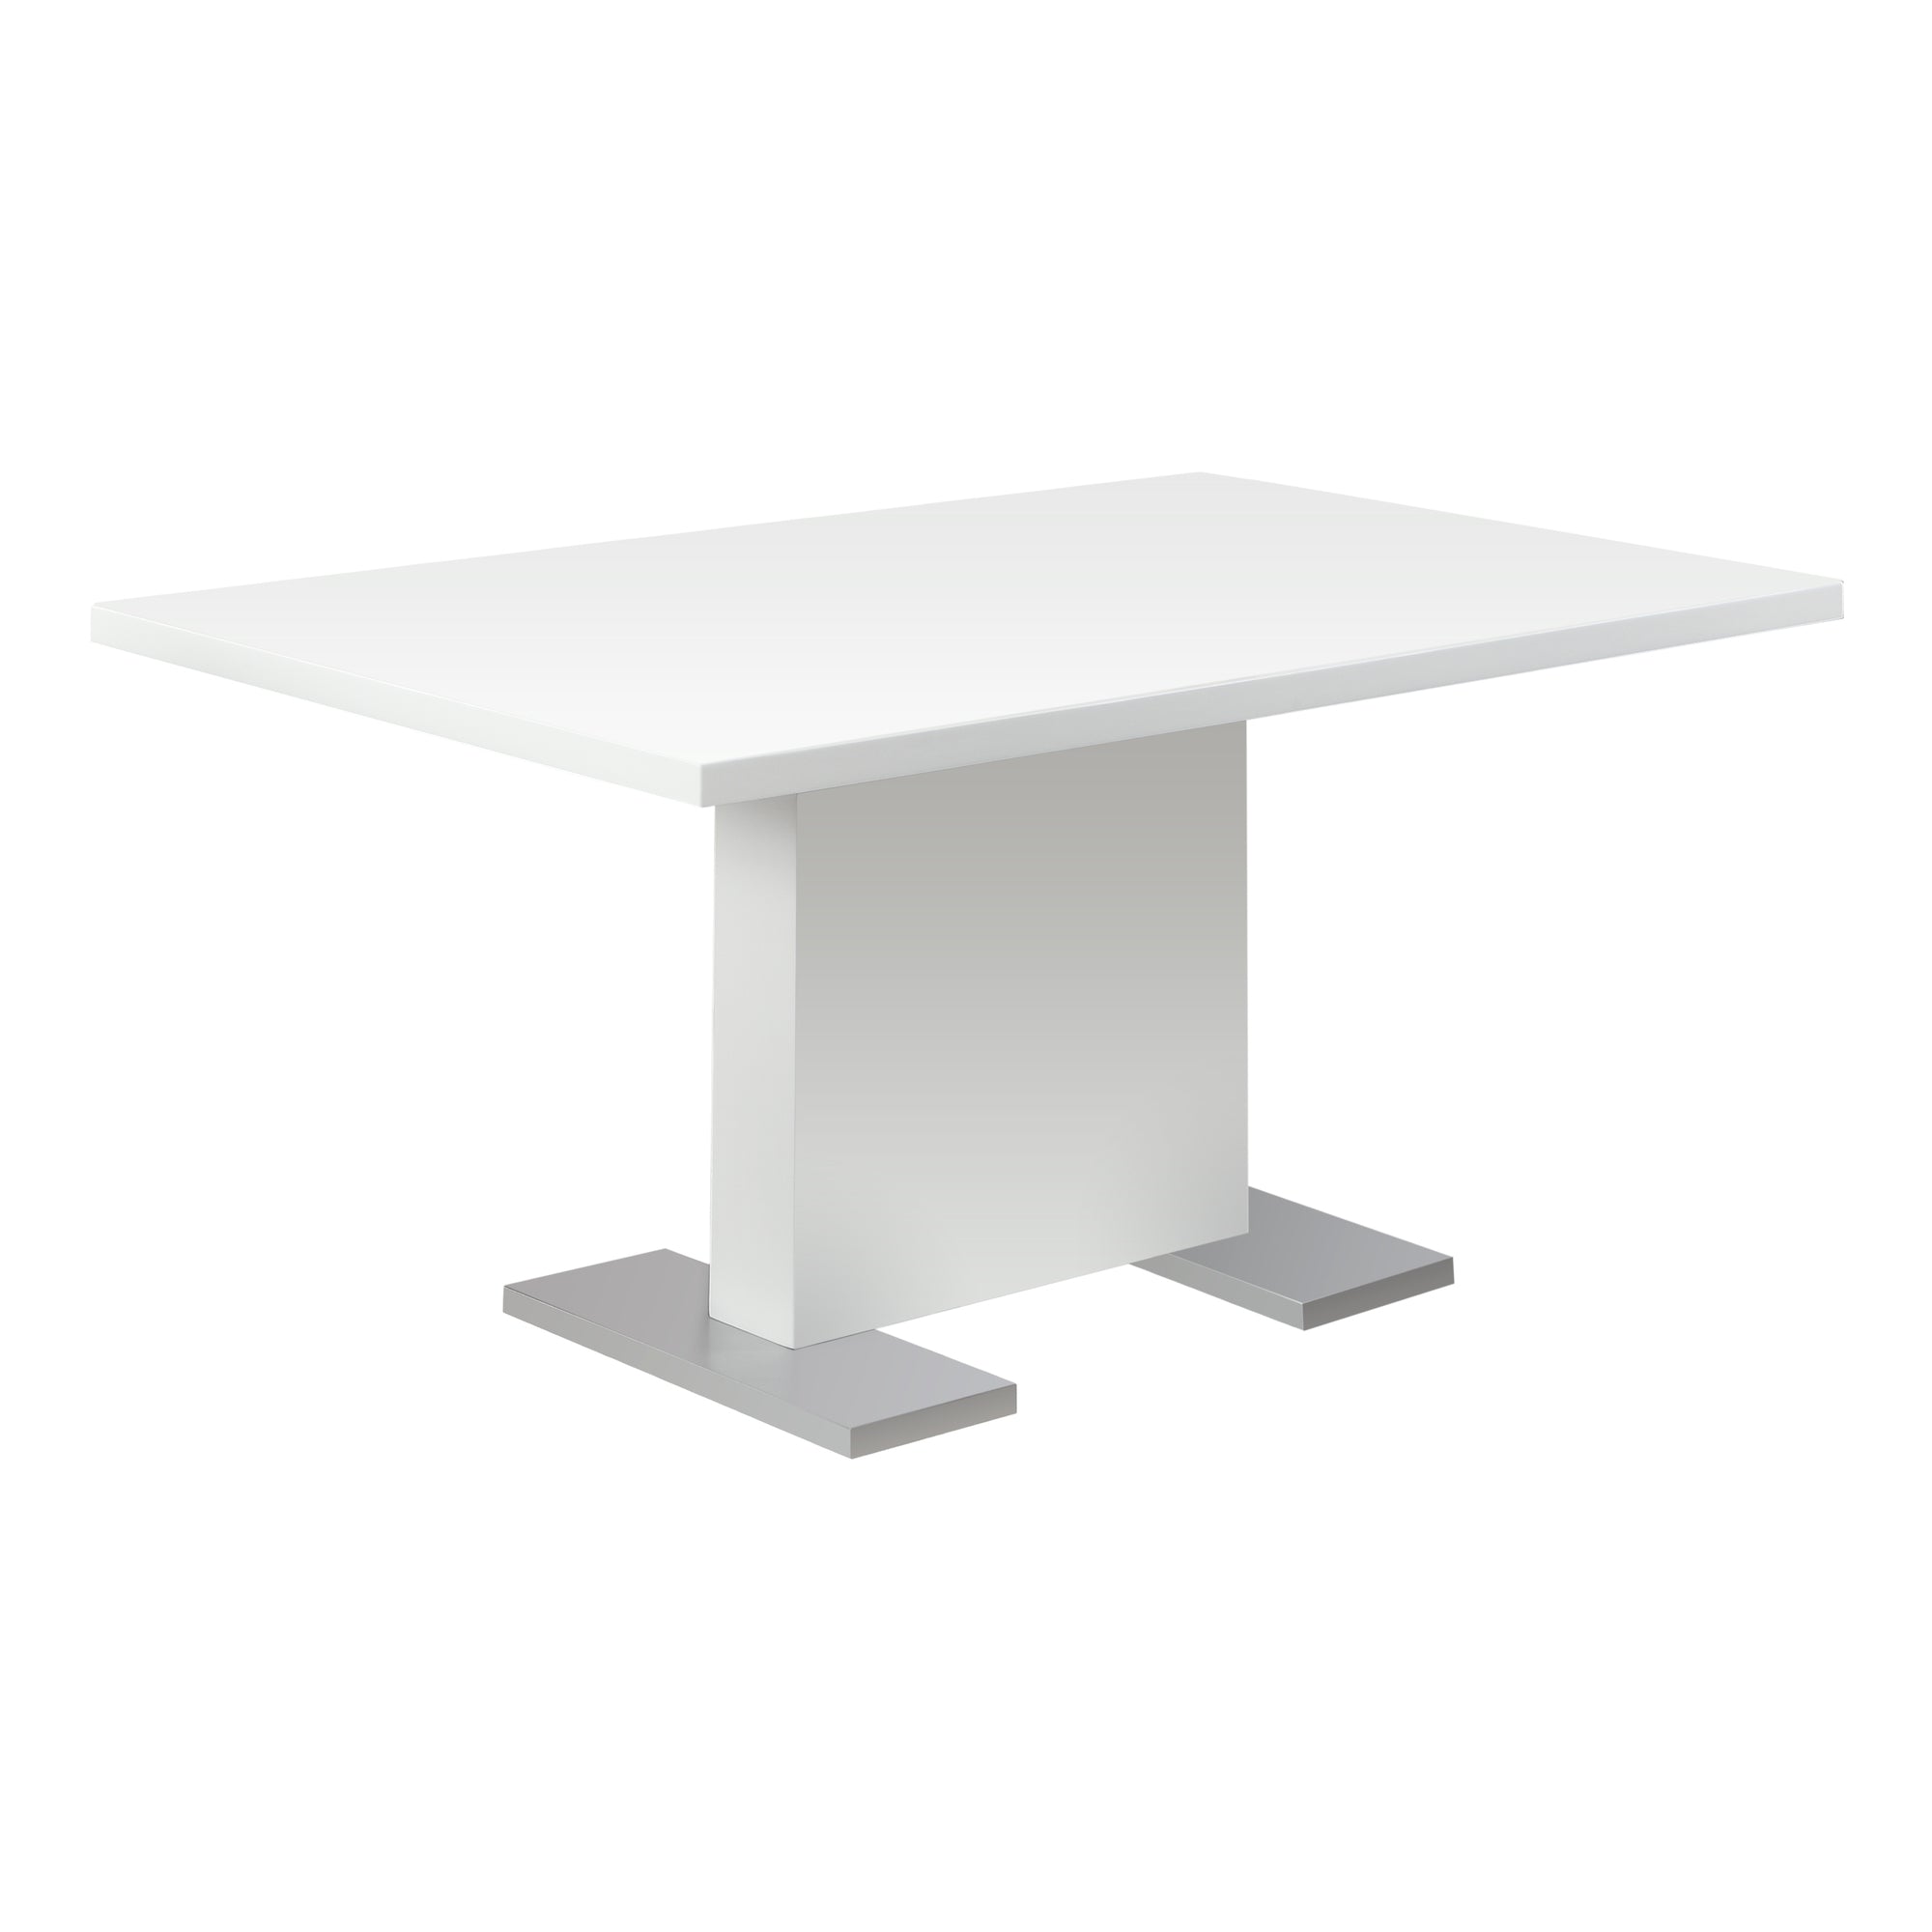 DINING TABLE - 35"X 60" / HIGH GLOSSY WHITE